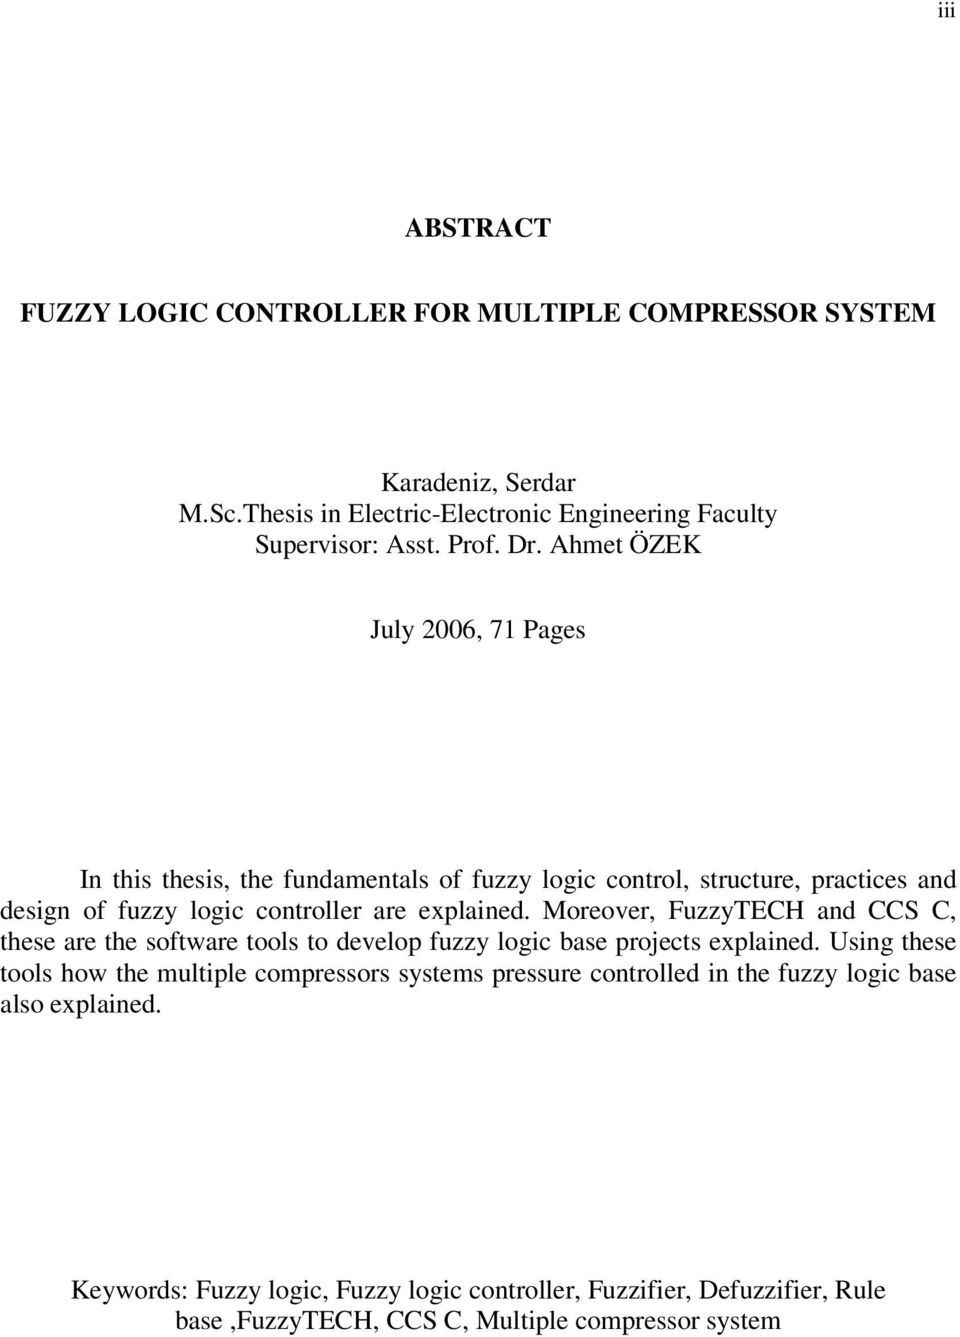 Moreover, FuzzyTECH and CCS C, these are the software tools to develop fuzzy logic base projects explained.